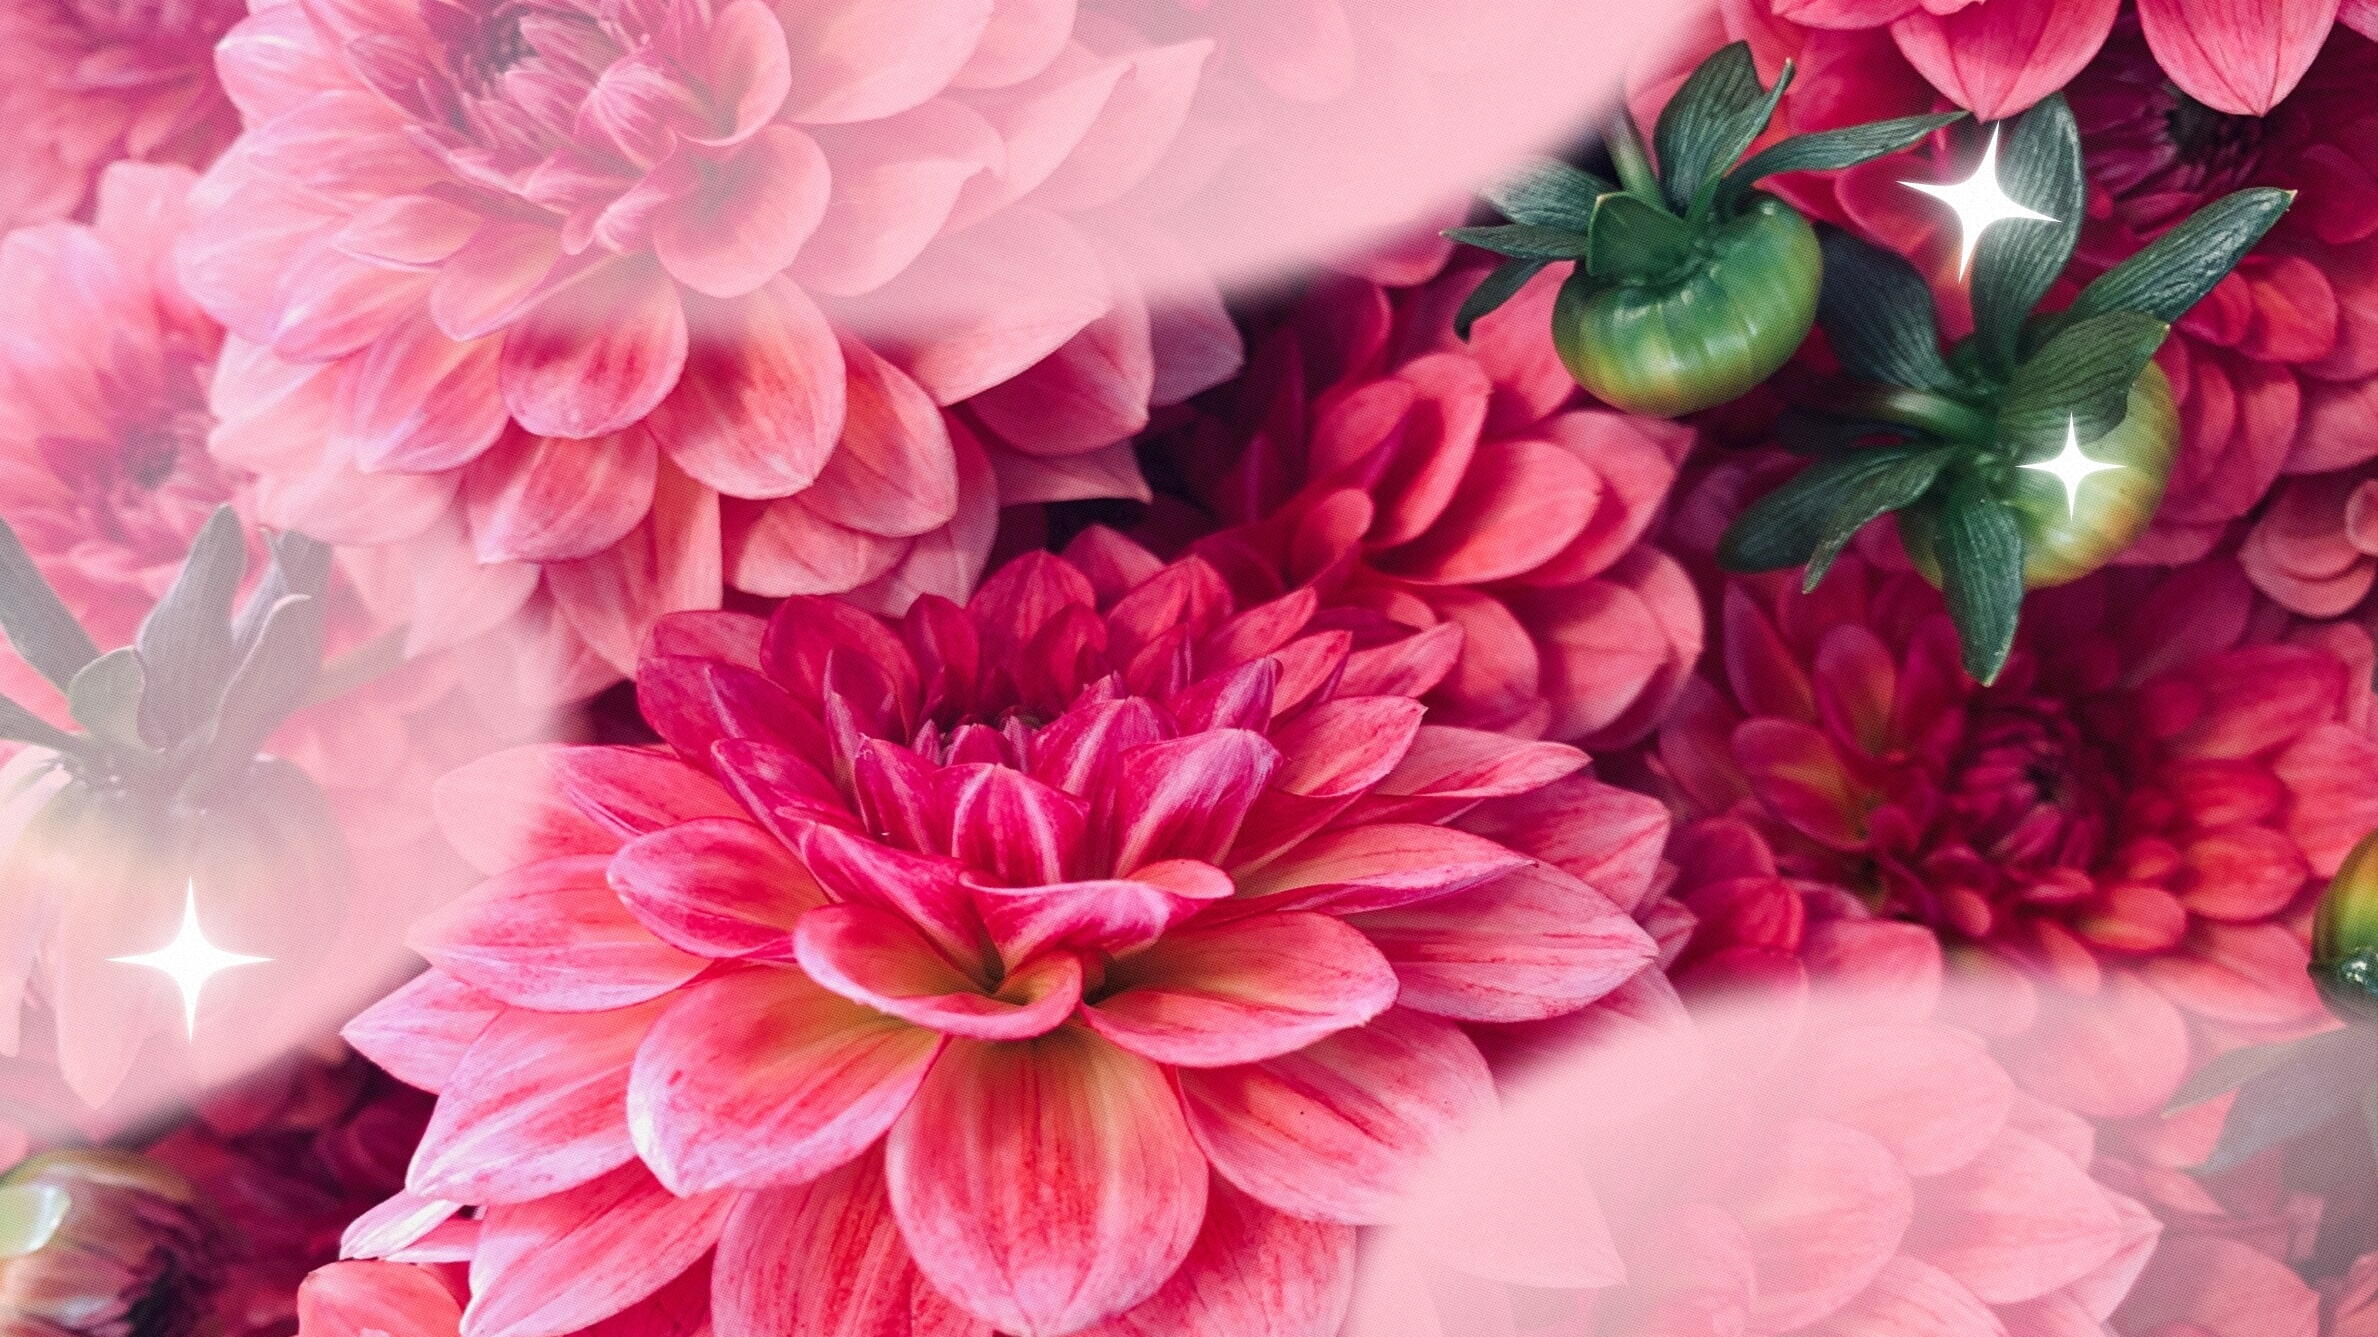 Dahlia flower meaning and colour symbolism